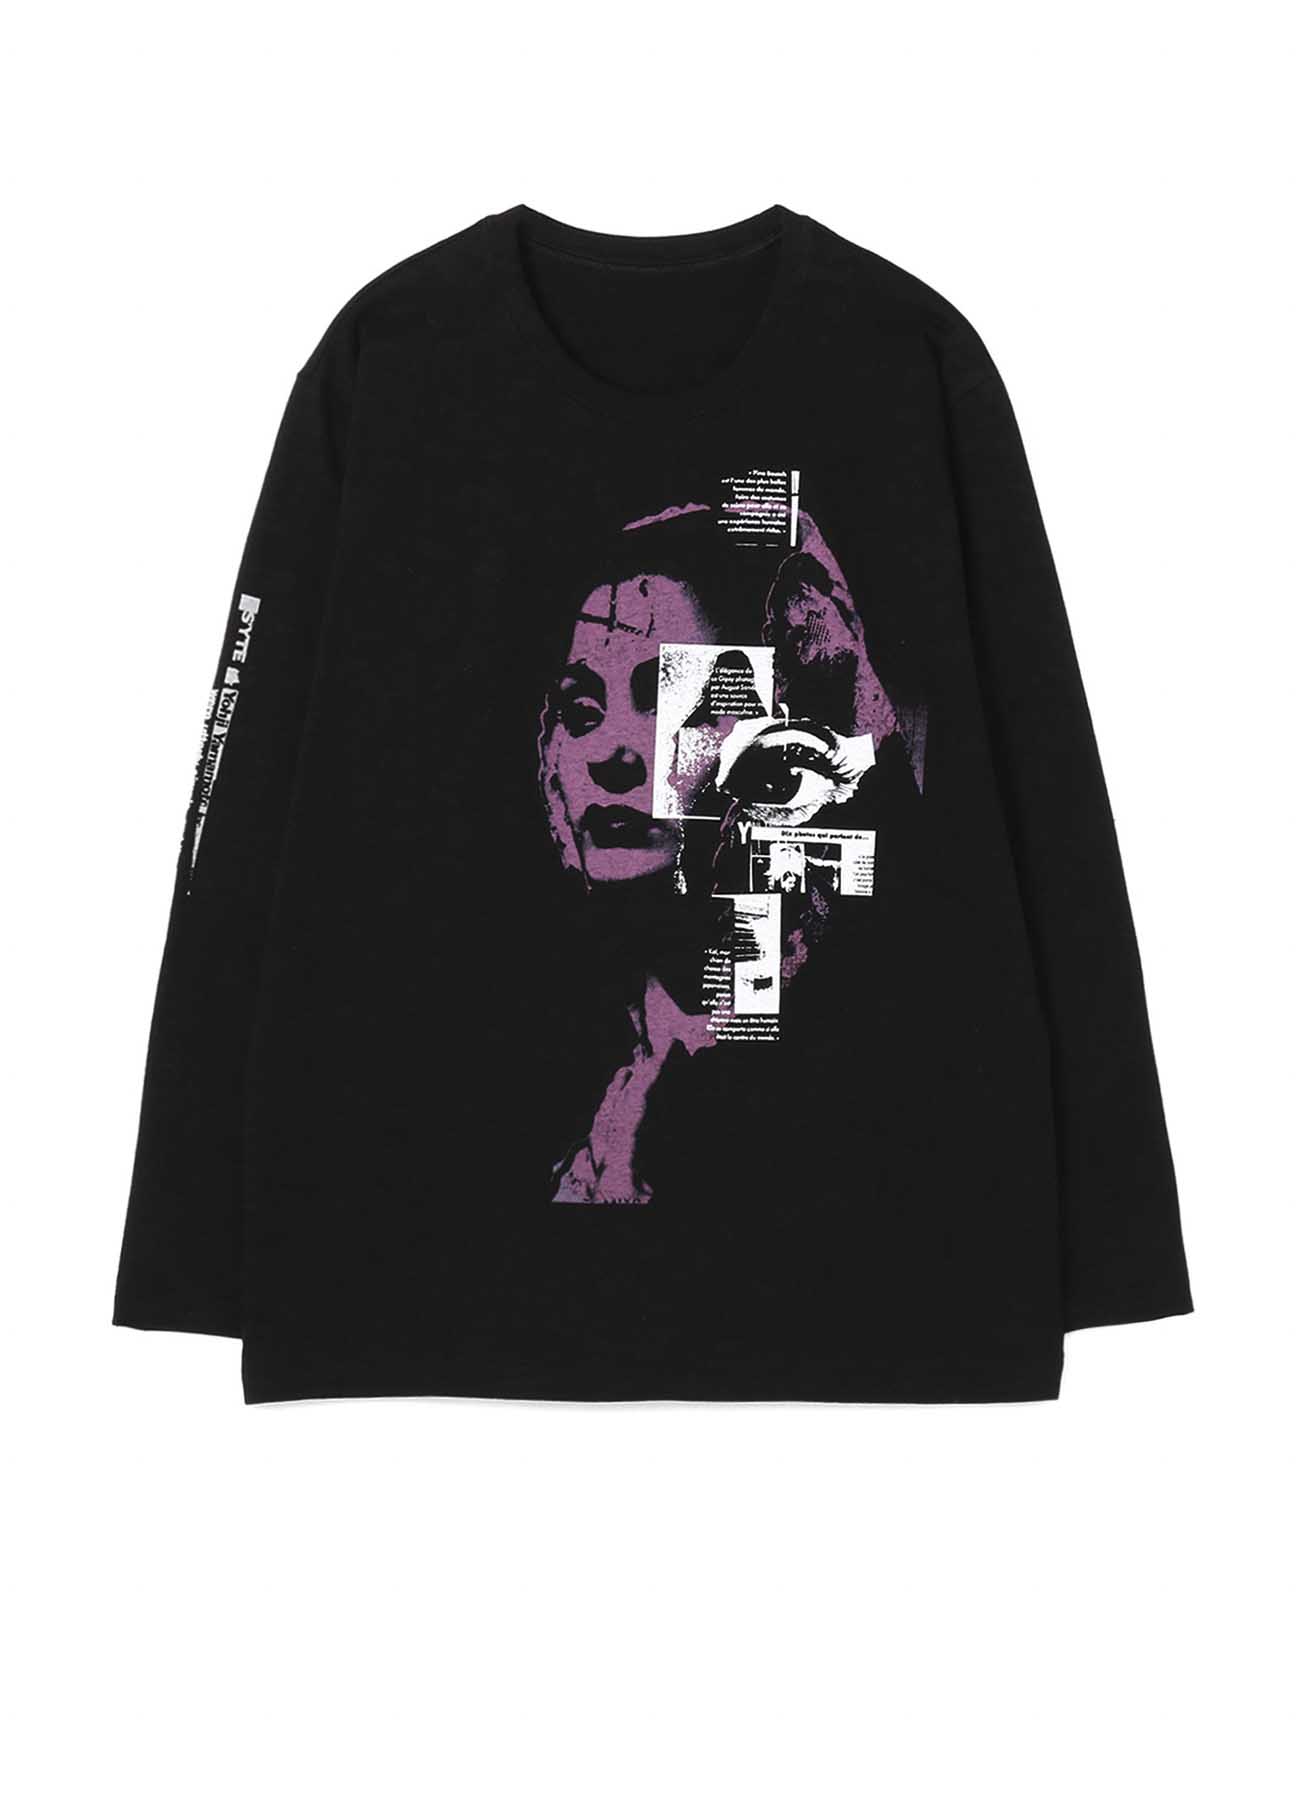 20/Cotton Jersey One-eyed Maria Long Sleeve T-Shirt